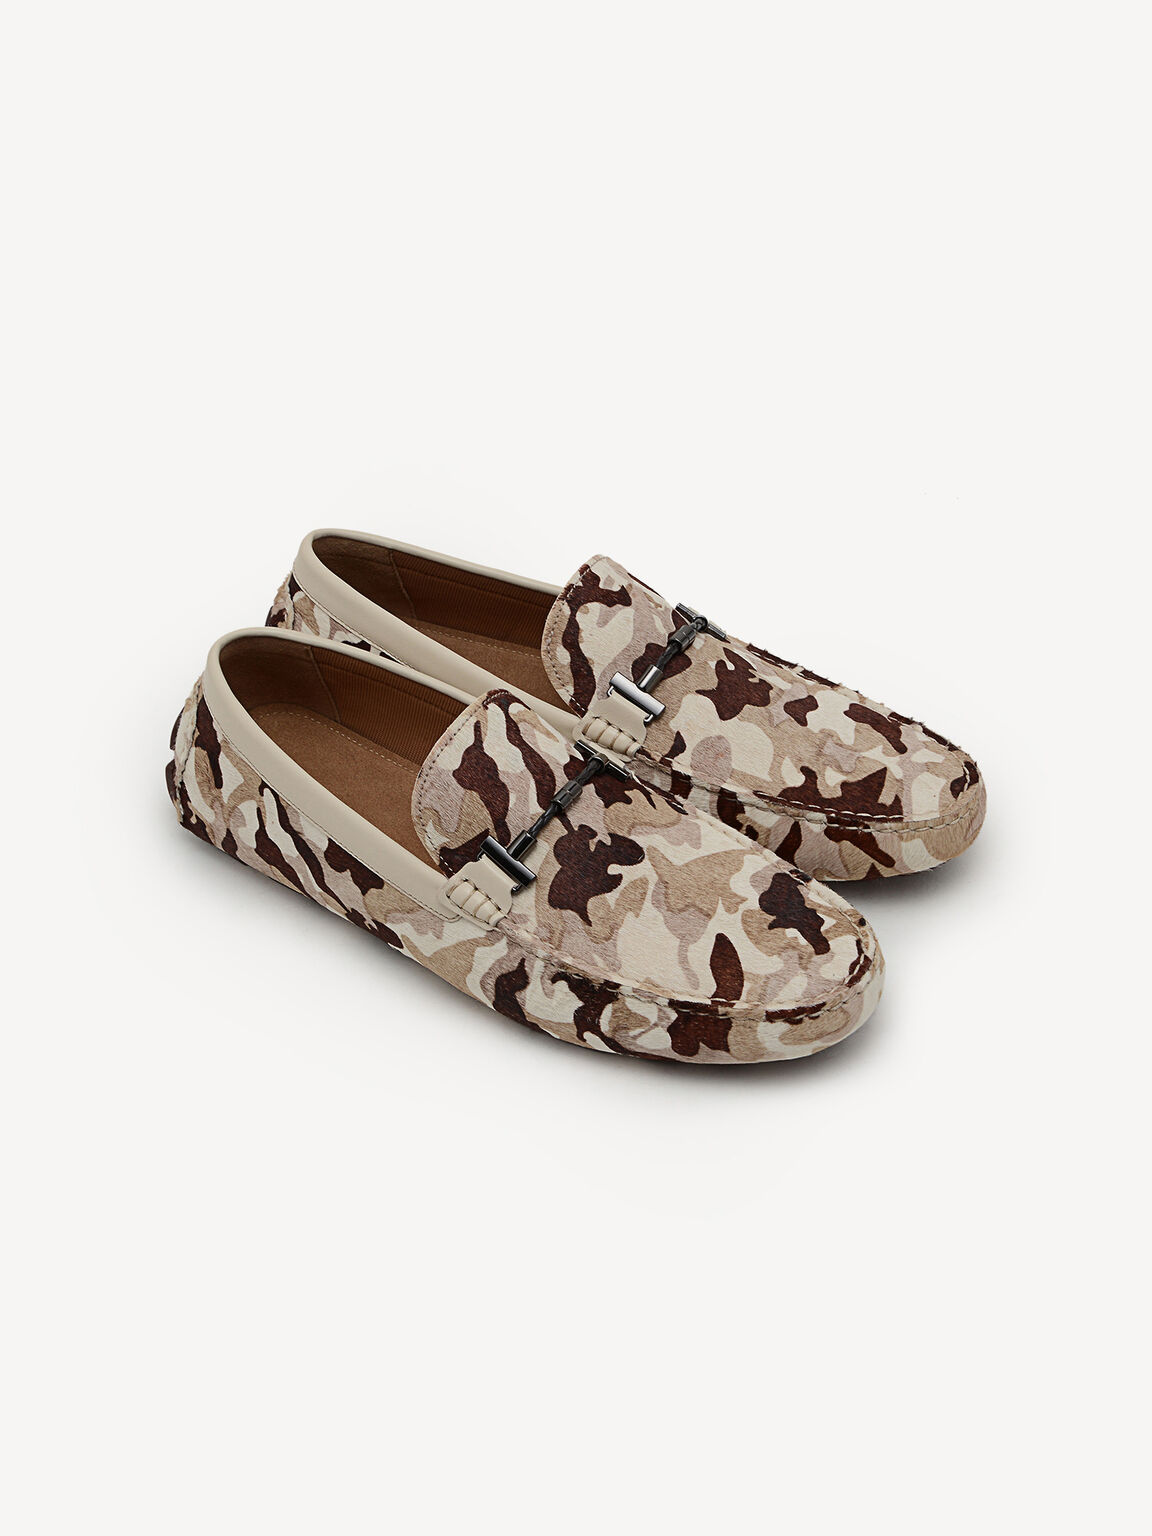 Leather Printed Moccasins, Multi